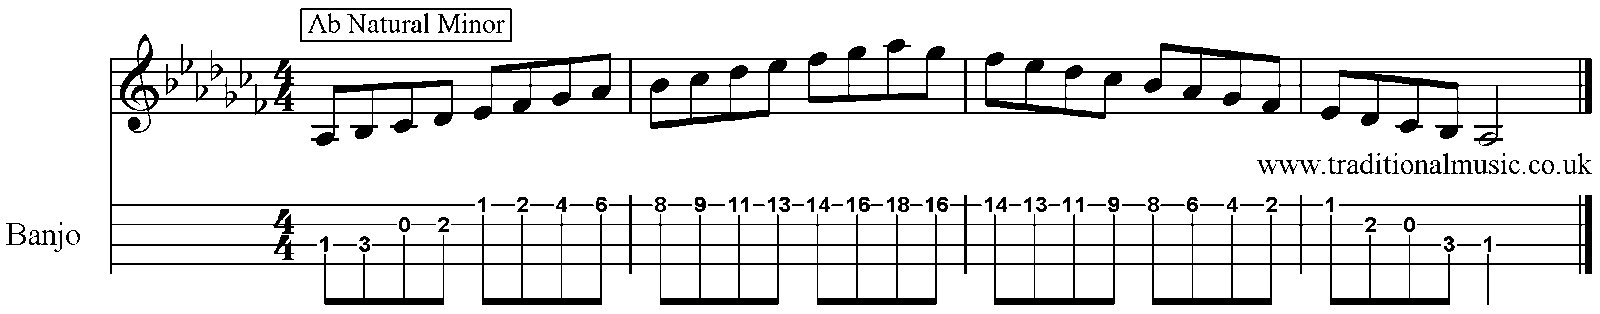 Minor Scales for Banjo Ab